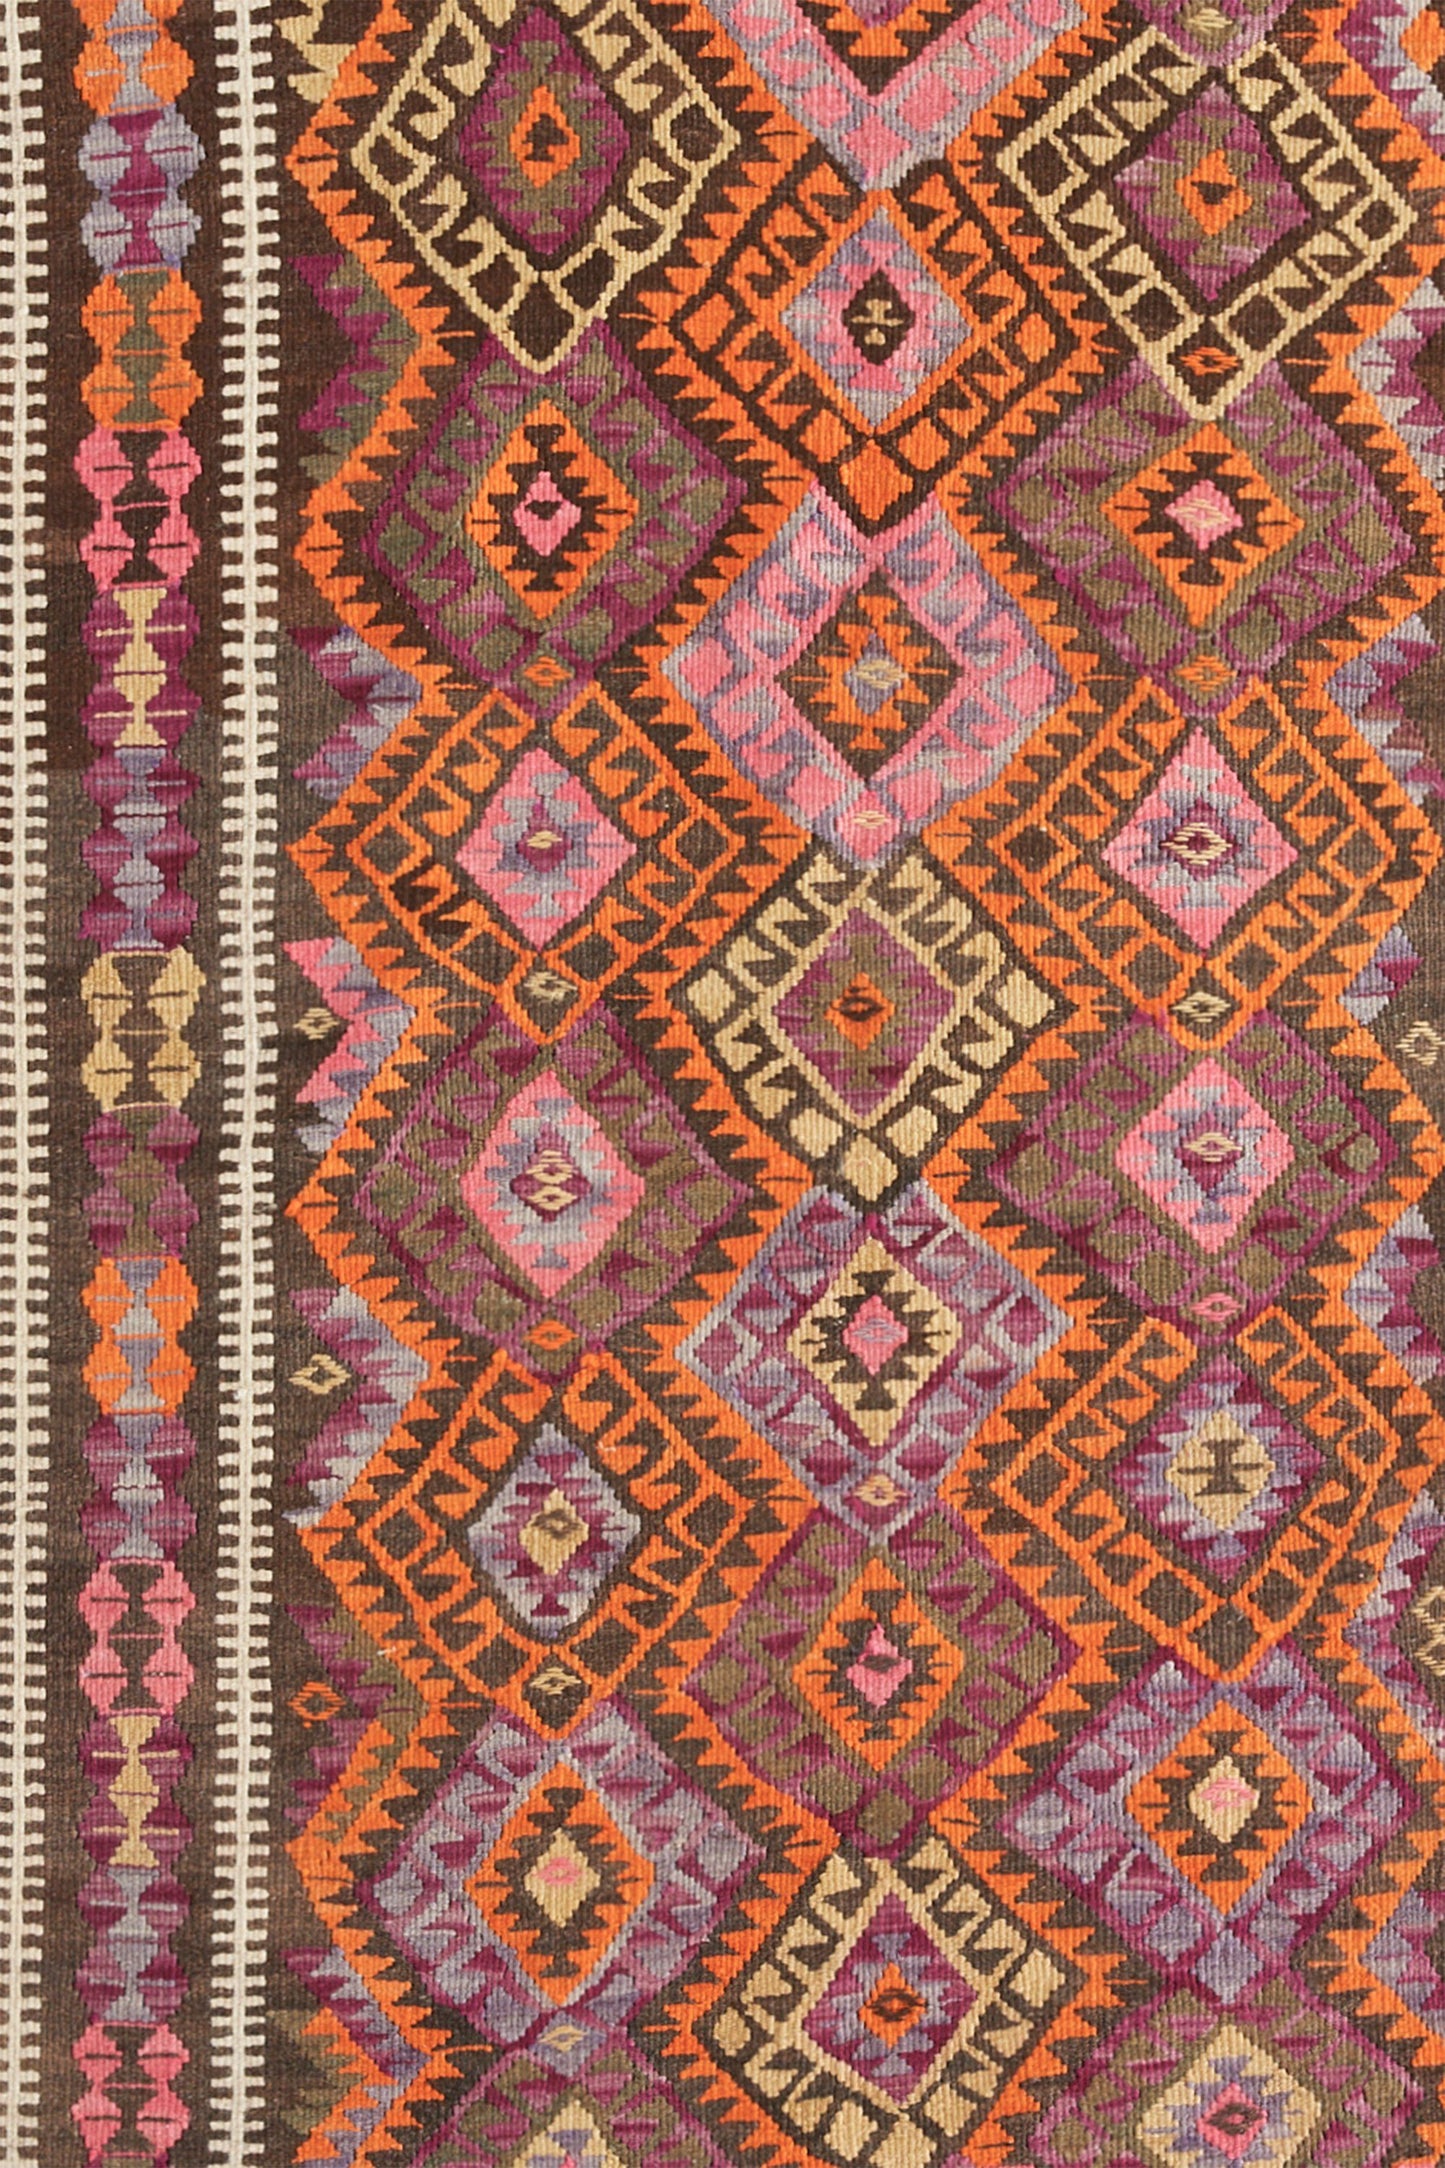 
                  
                    'Prickly Pear' Vintage Turkish Kilim Area Rug - 3'9" x 5'8" - Canary Lane - Curated Textiles
                  
                